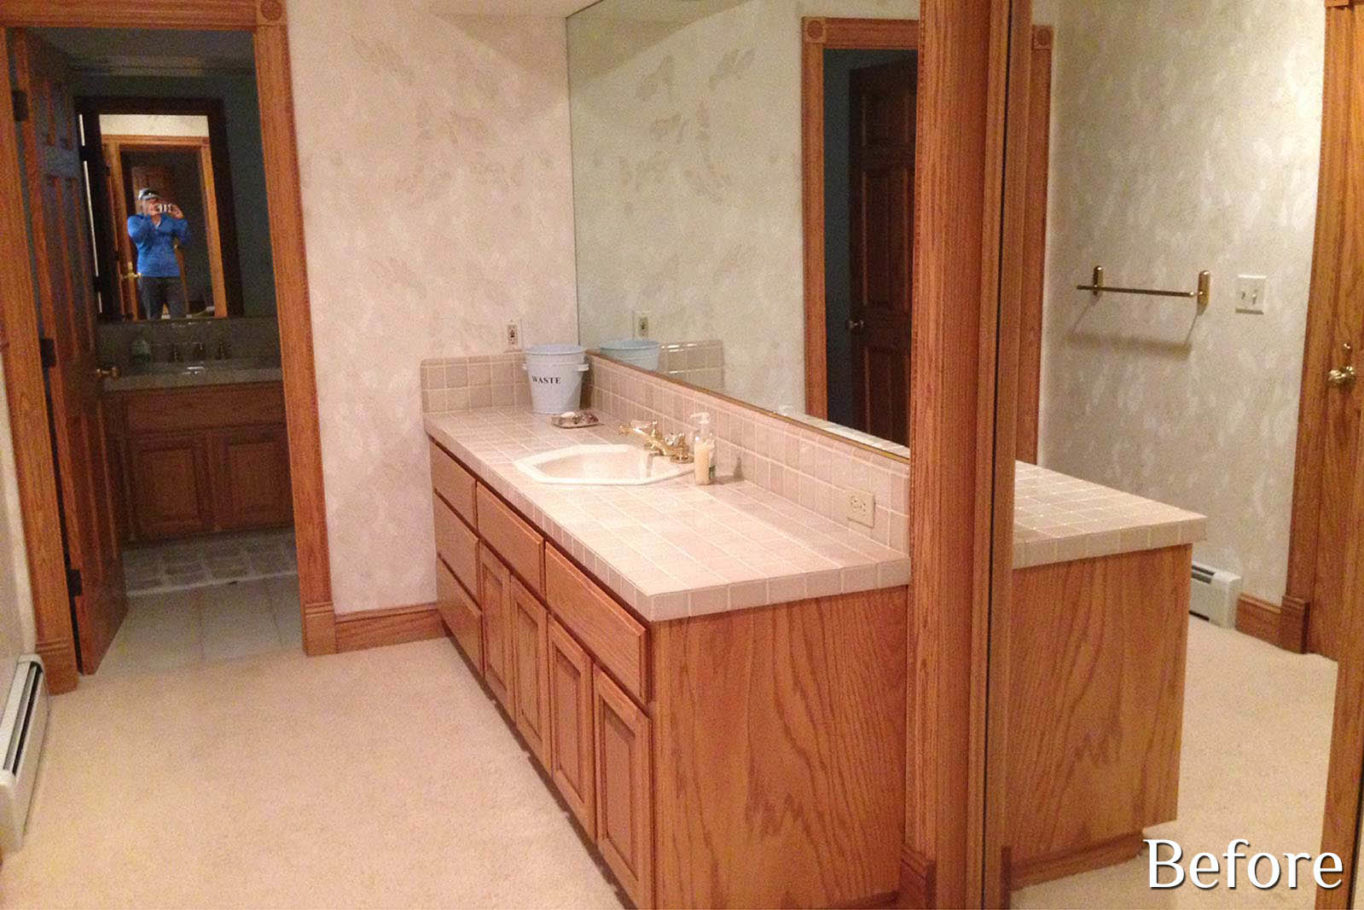 A natural wood bathroom and tile flooring